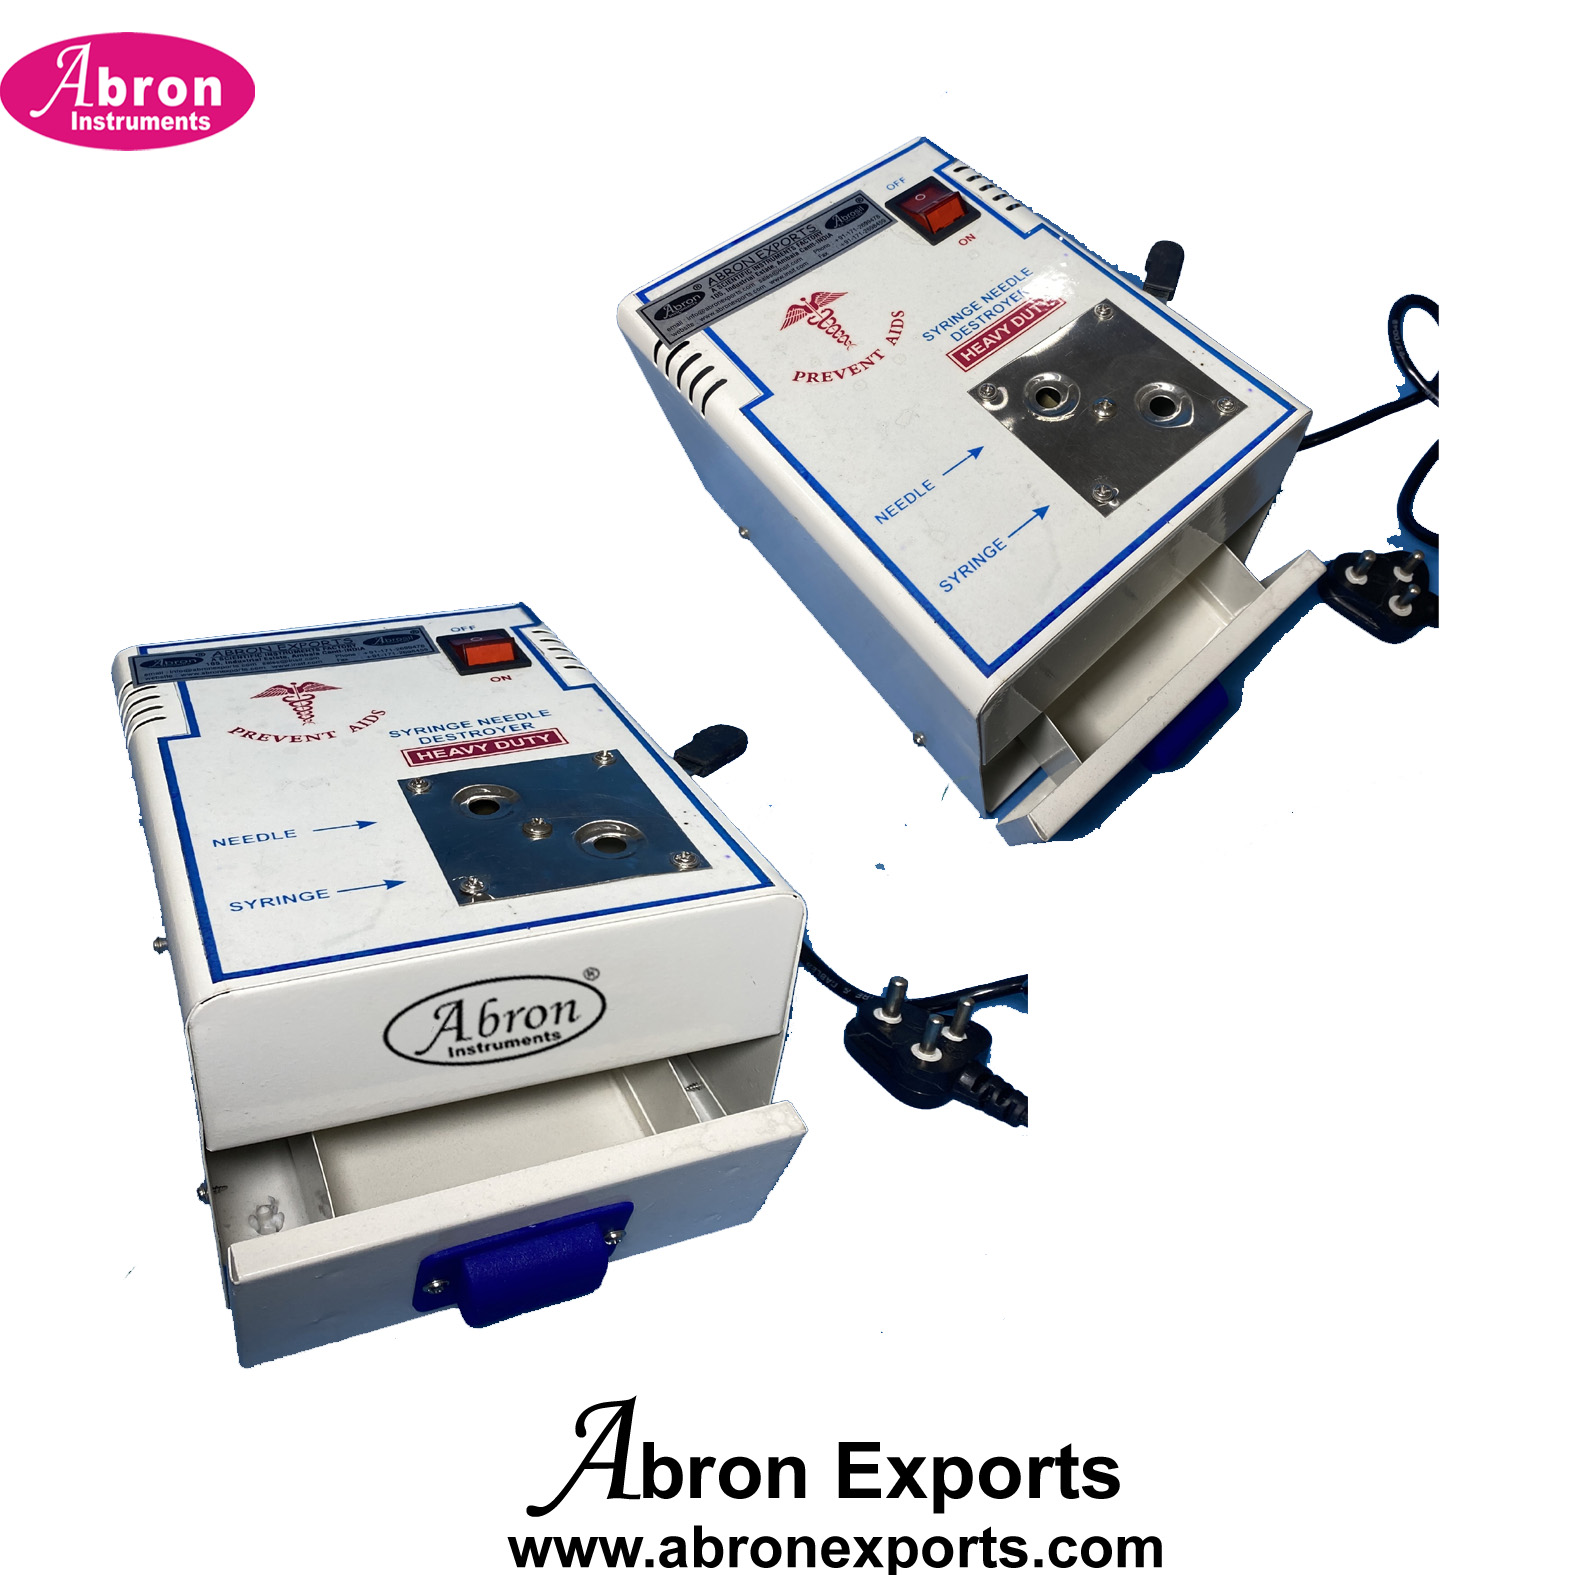 Needle Syringe Destroyer Metal Body Electric Miscellaneous surgical medical product Abron ABM-2603M 